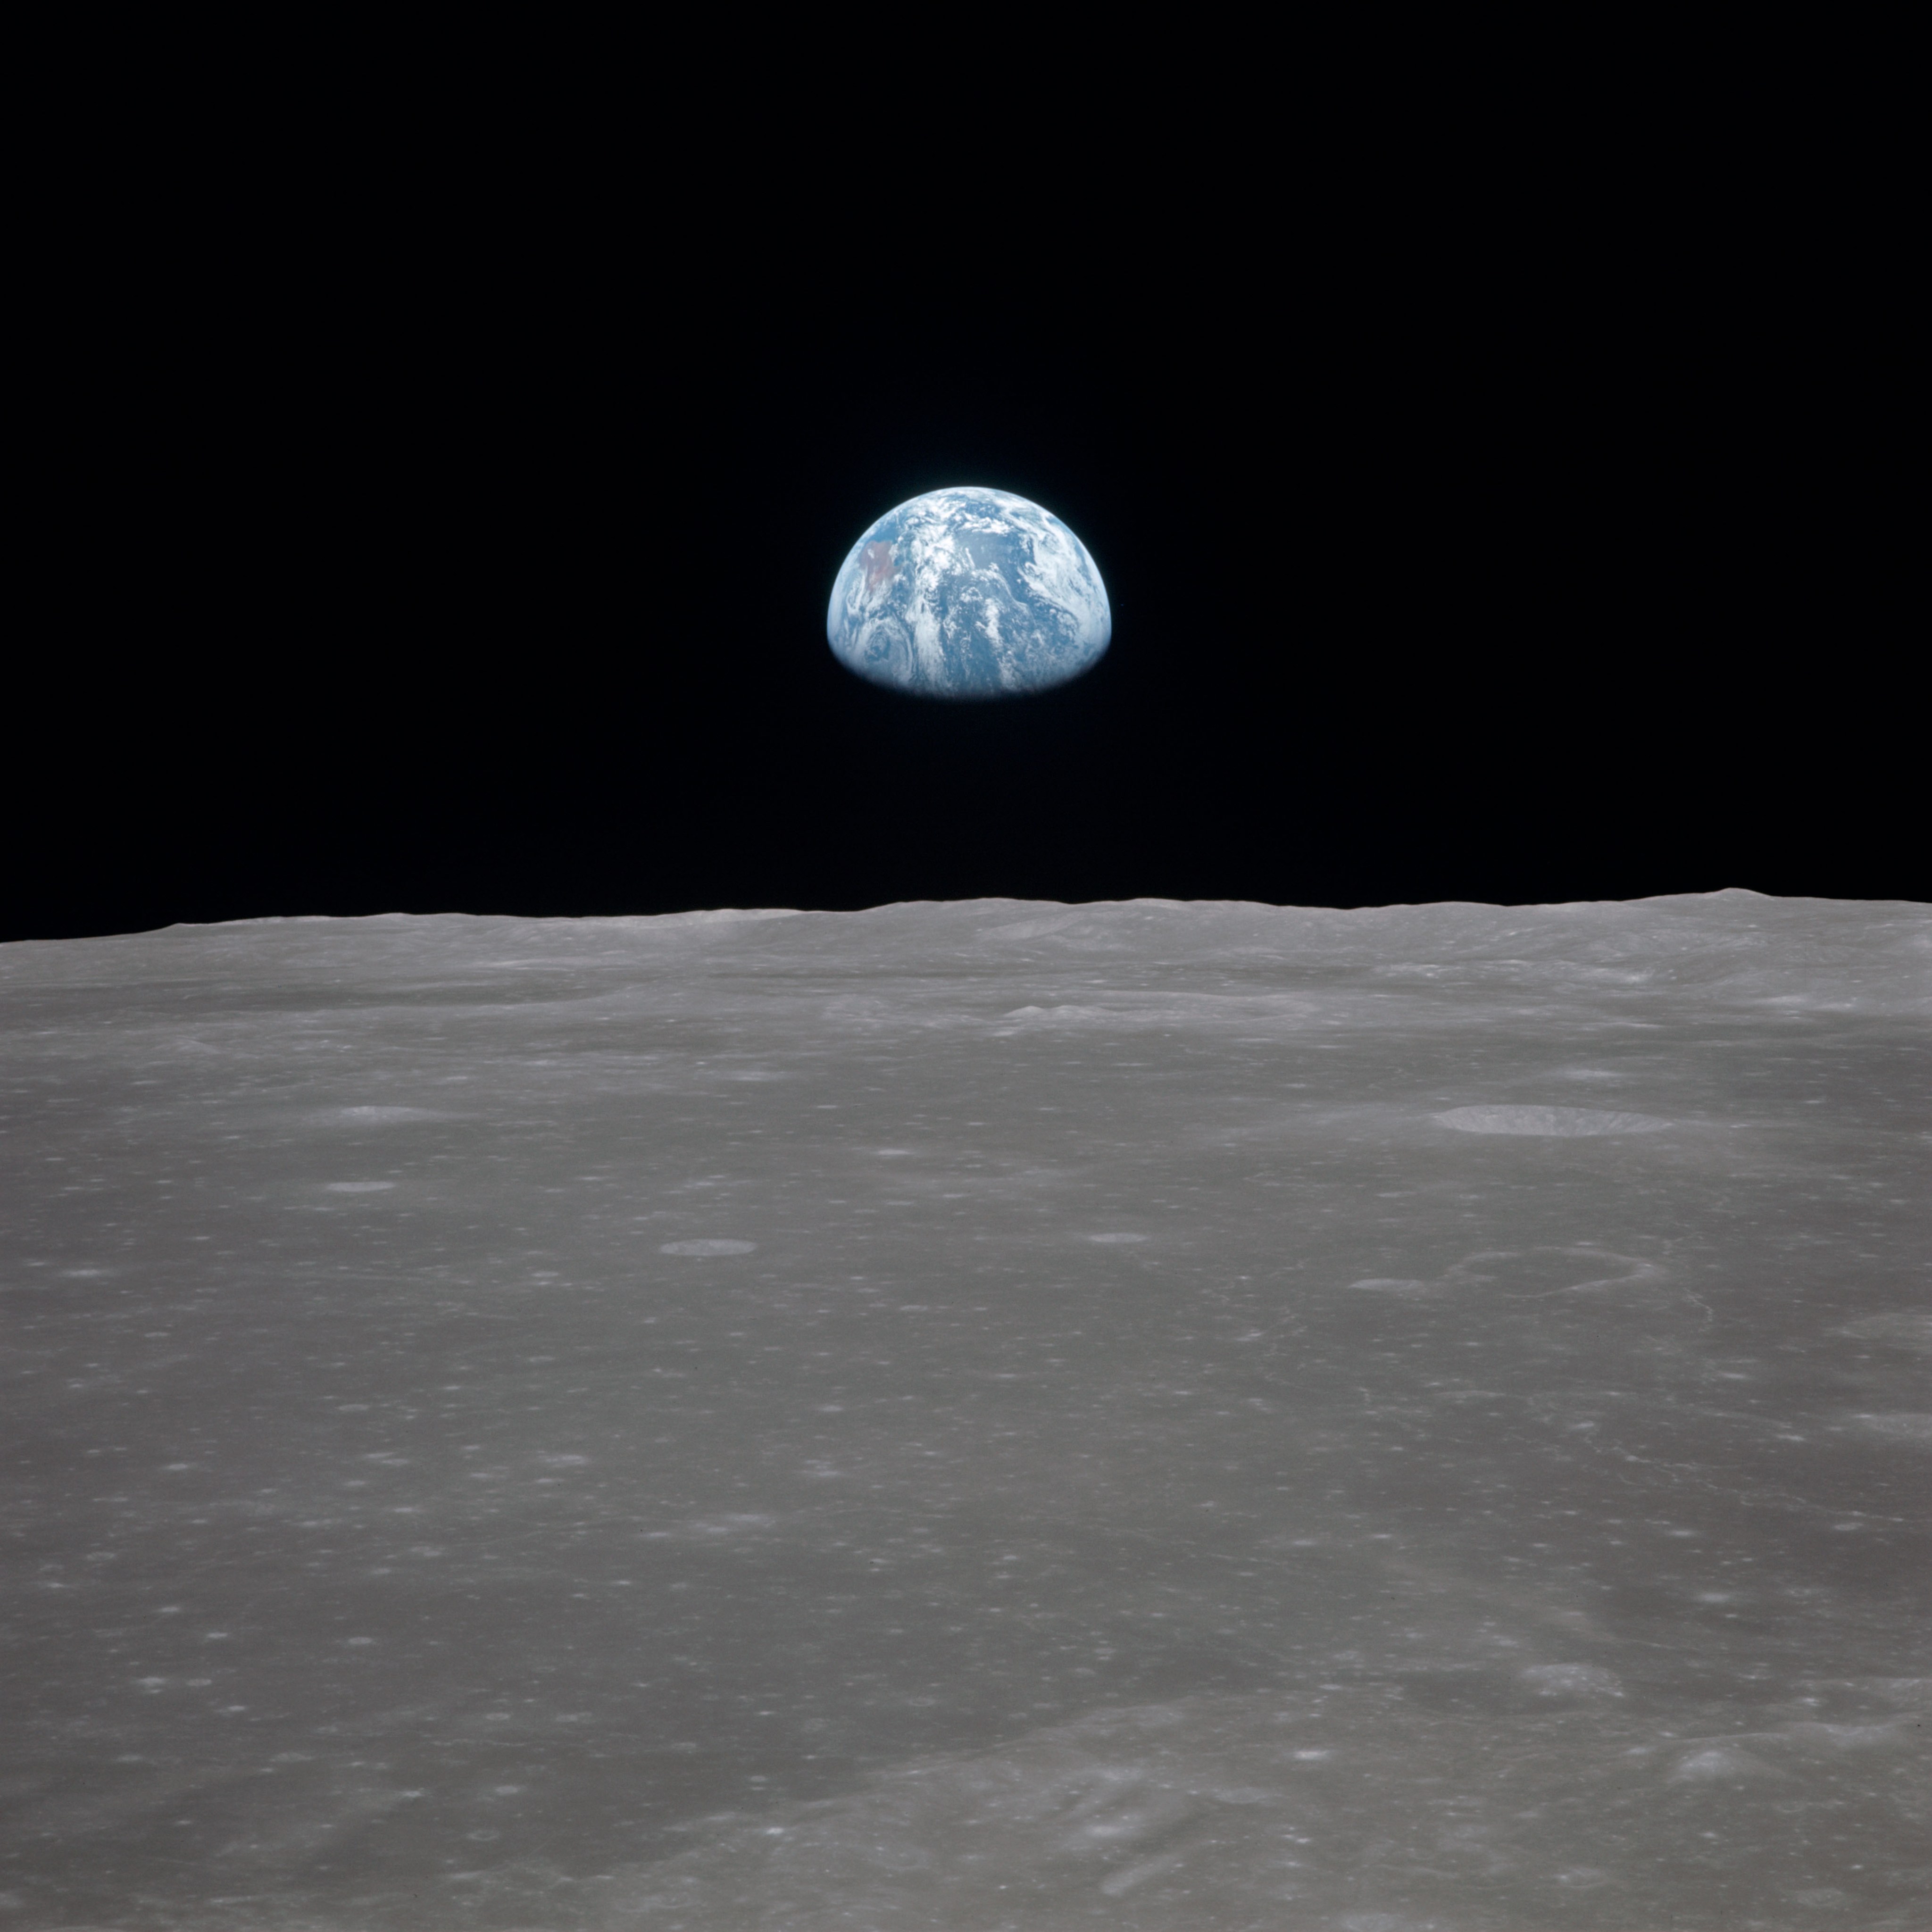 View of Moon limb with Earth on the horizon,Mare Smythii Region. Earth rise. This image was taken before separation of the LM and the Command Module during Apollo 11 Mission.